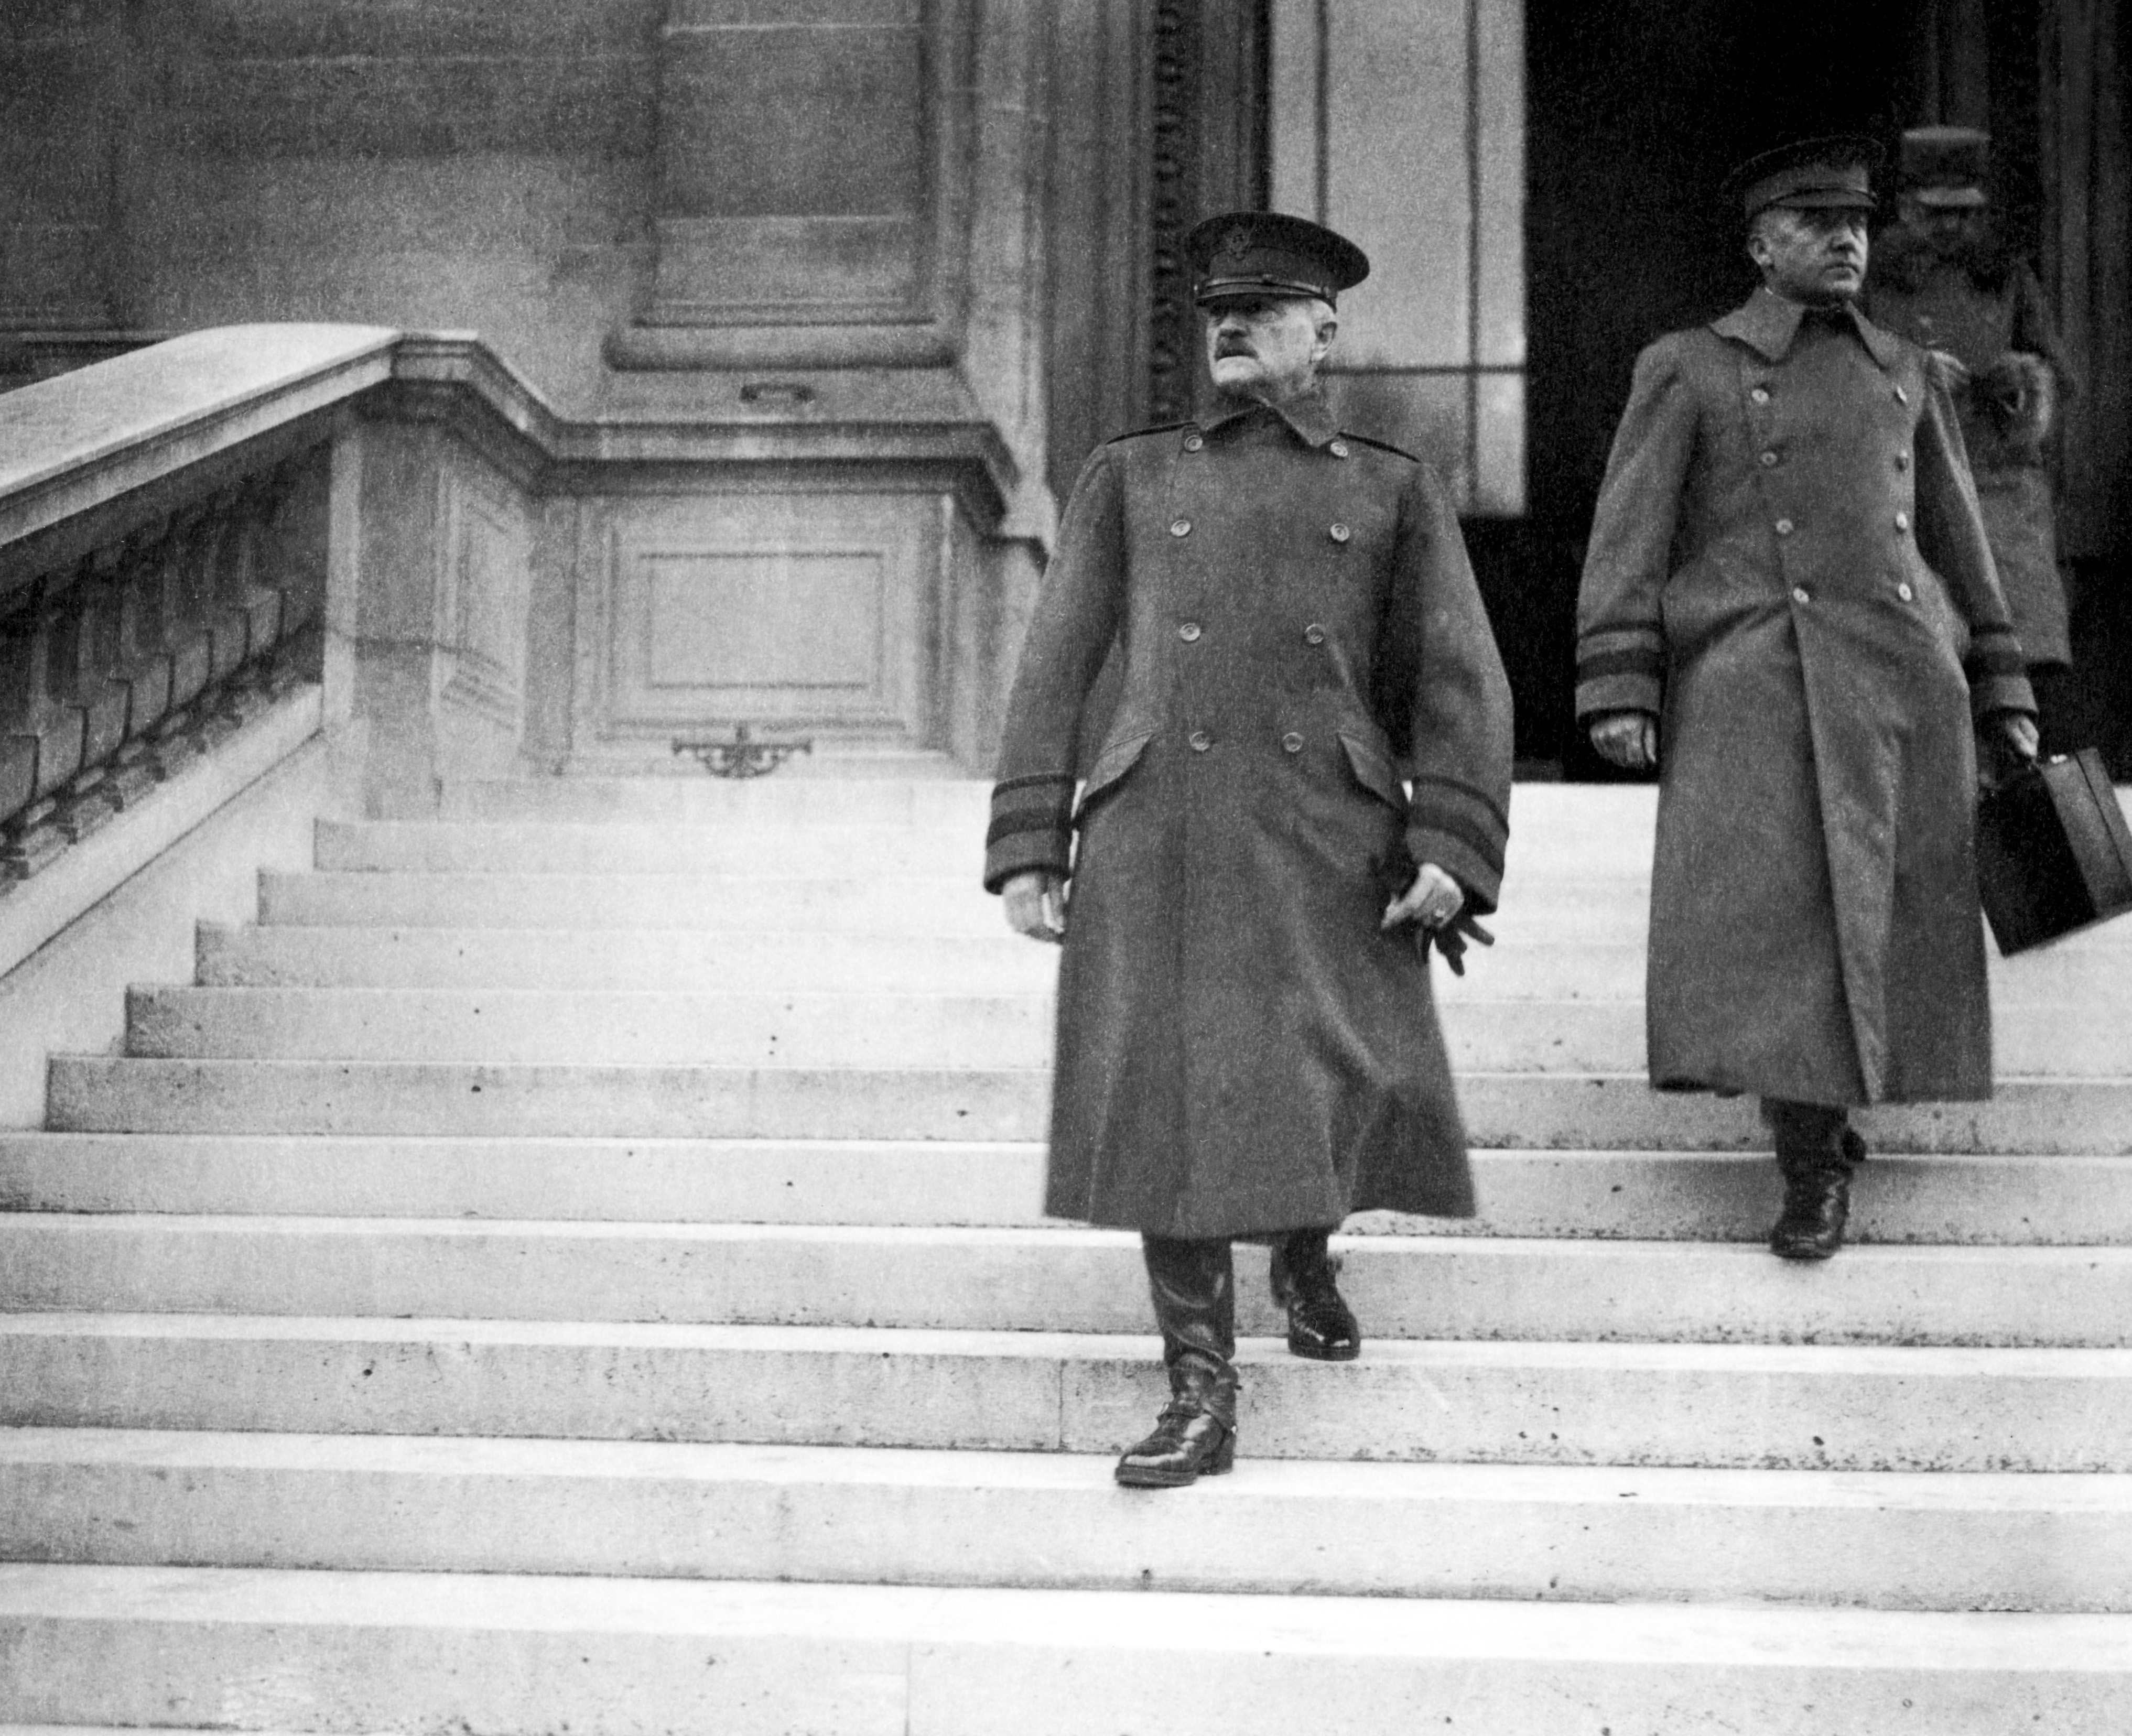 Pershing at the peace conference in Paris, 1919